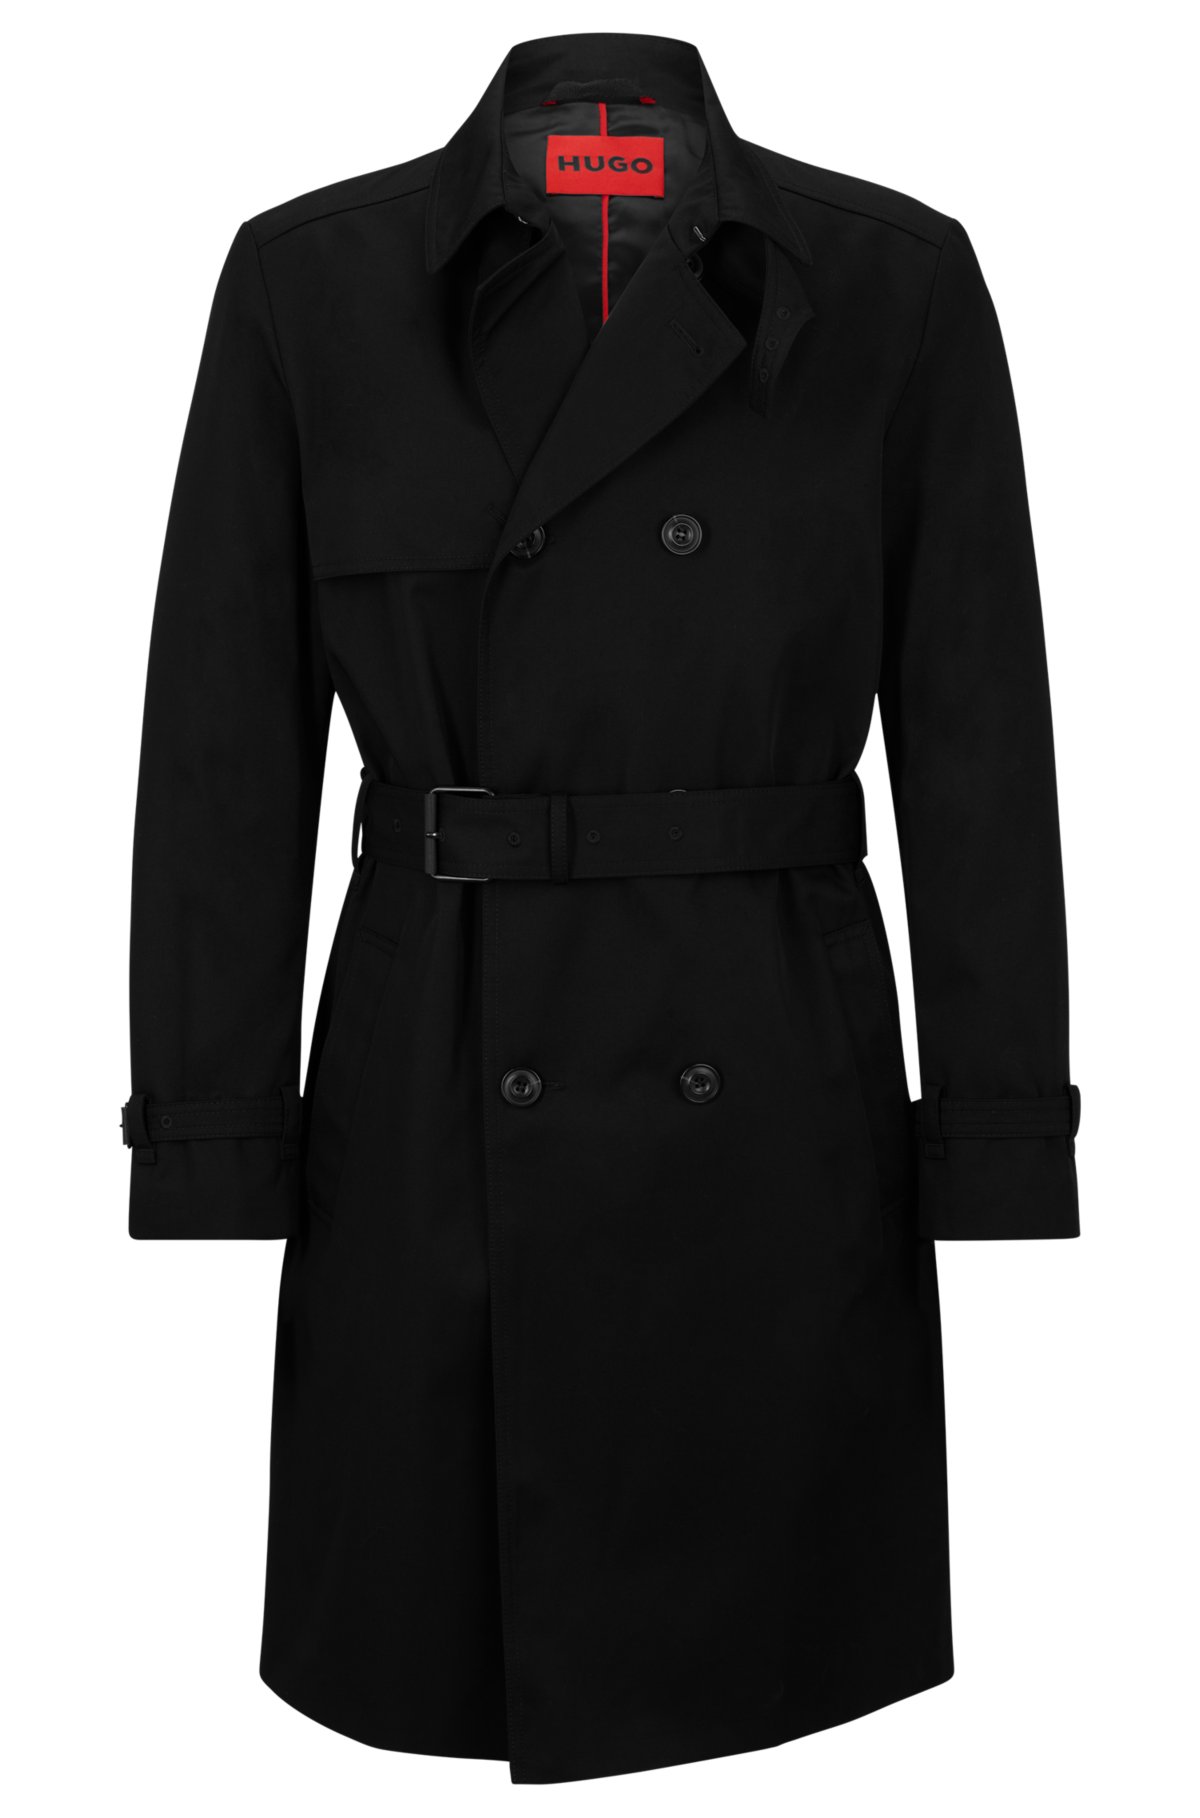 HUGO - Water-repellent trench coat with double-breasted front